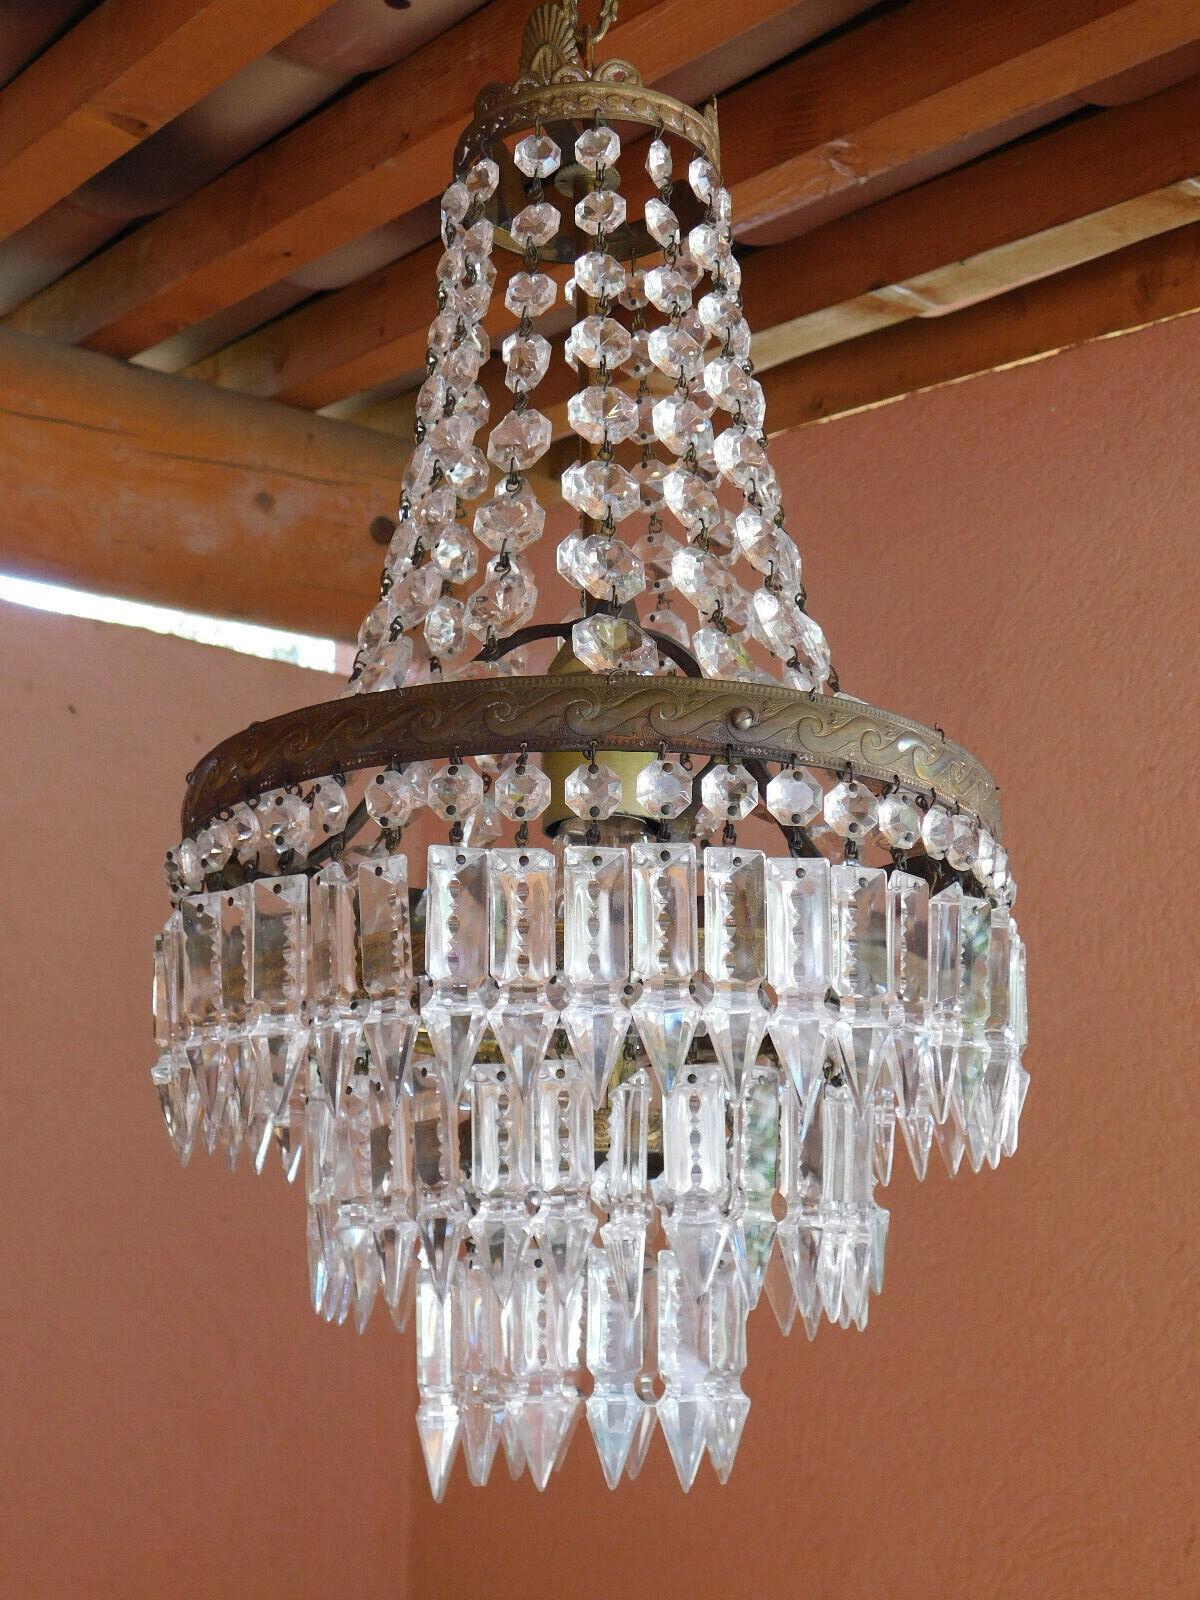 19thc French Empire style Bronze and Crystal Chandelier. Cascading crystal form. Bronze frame. Purchased in France.